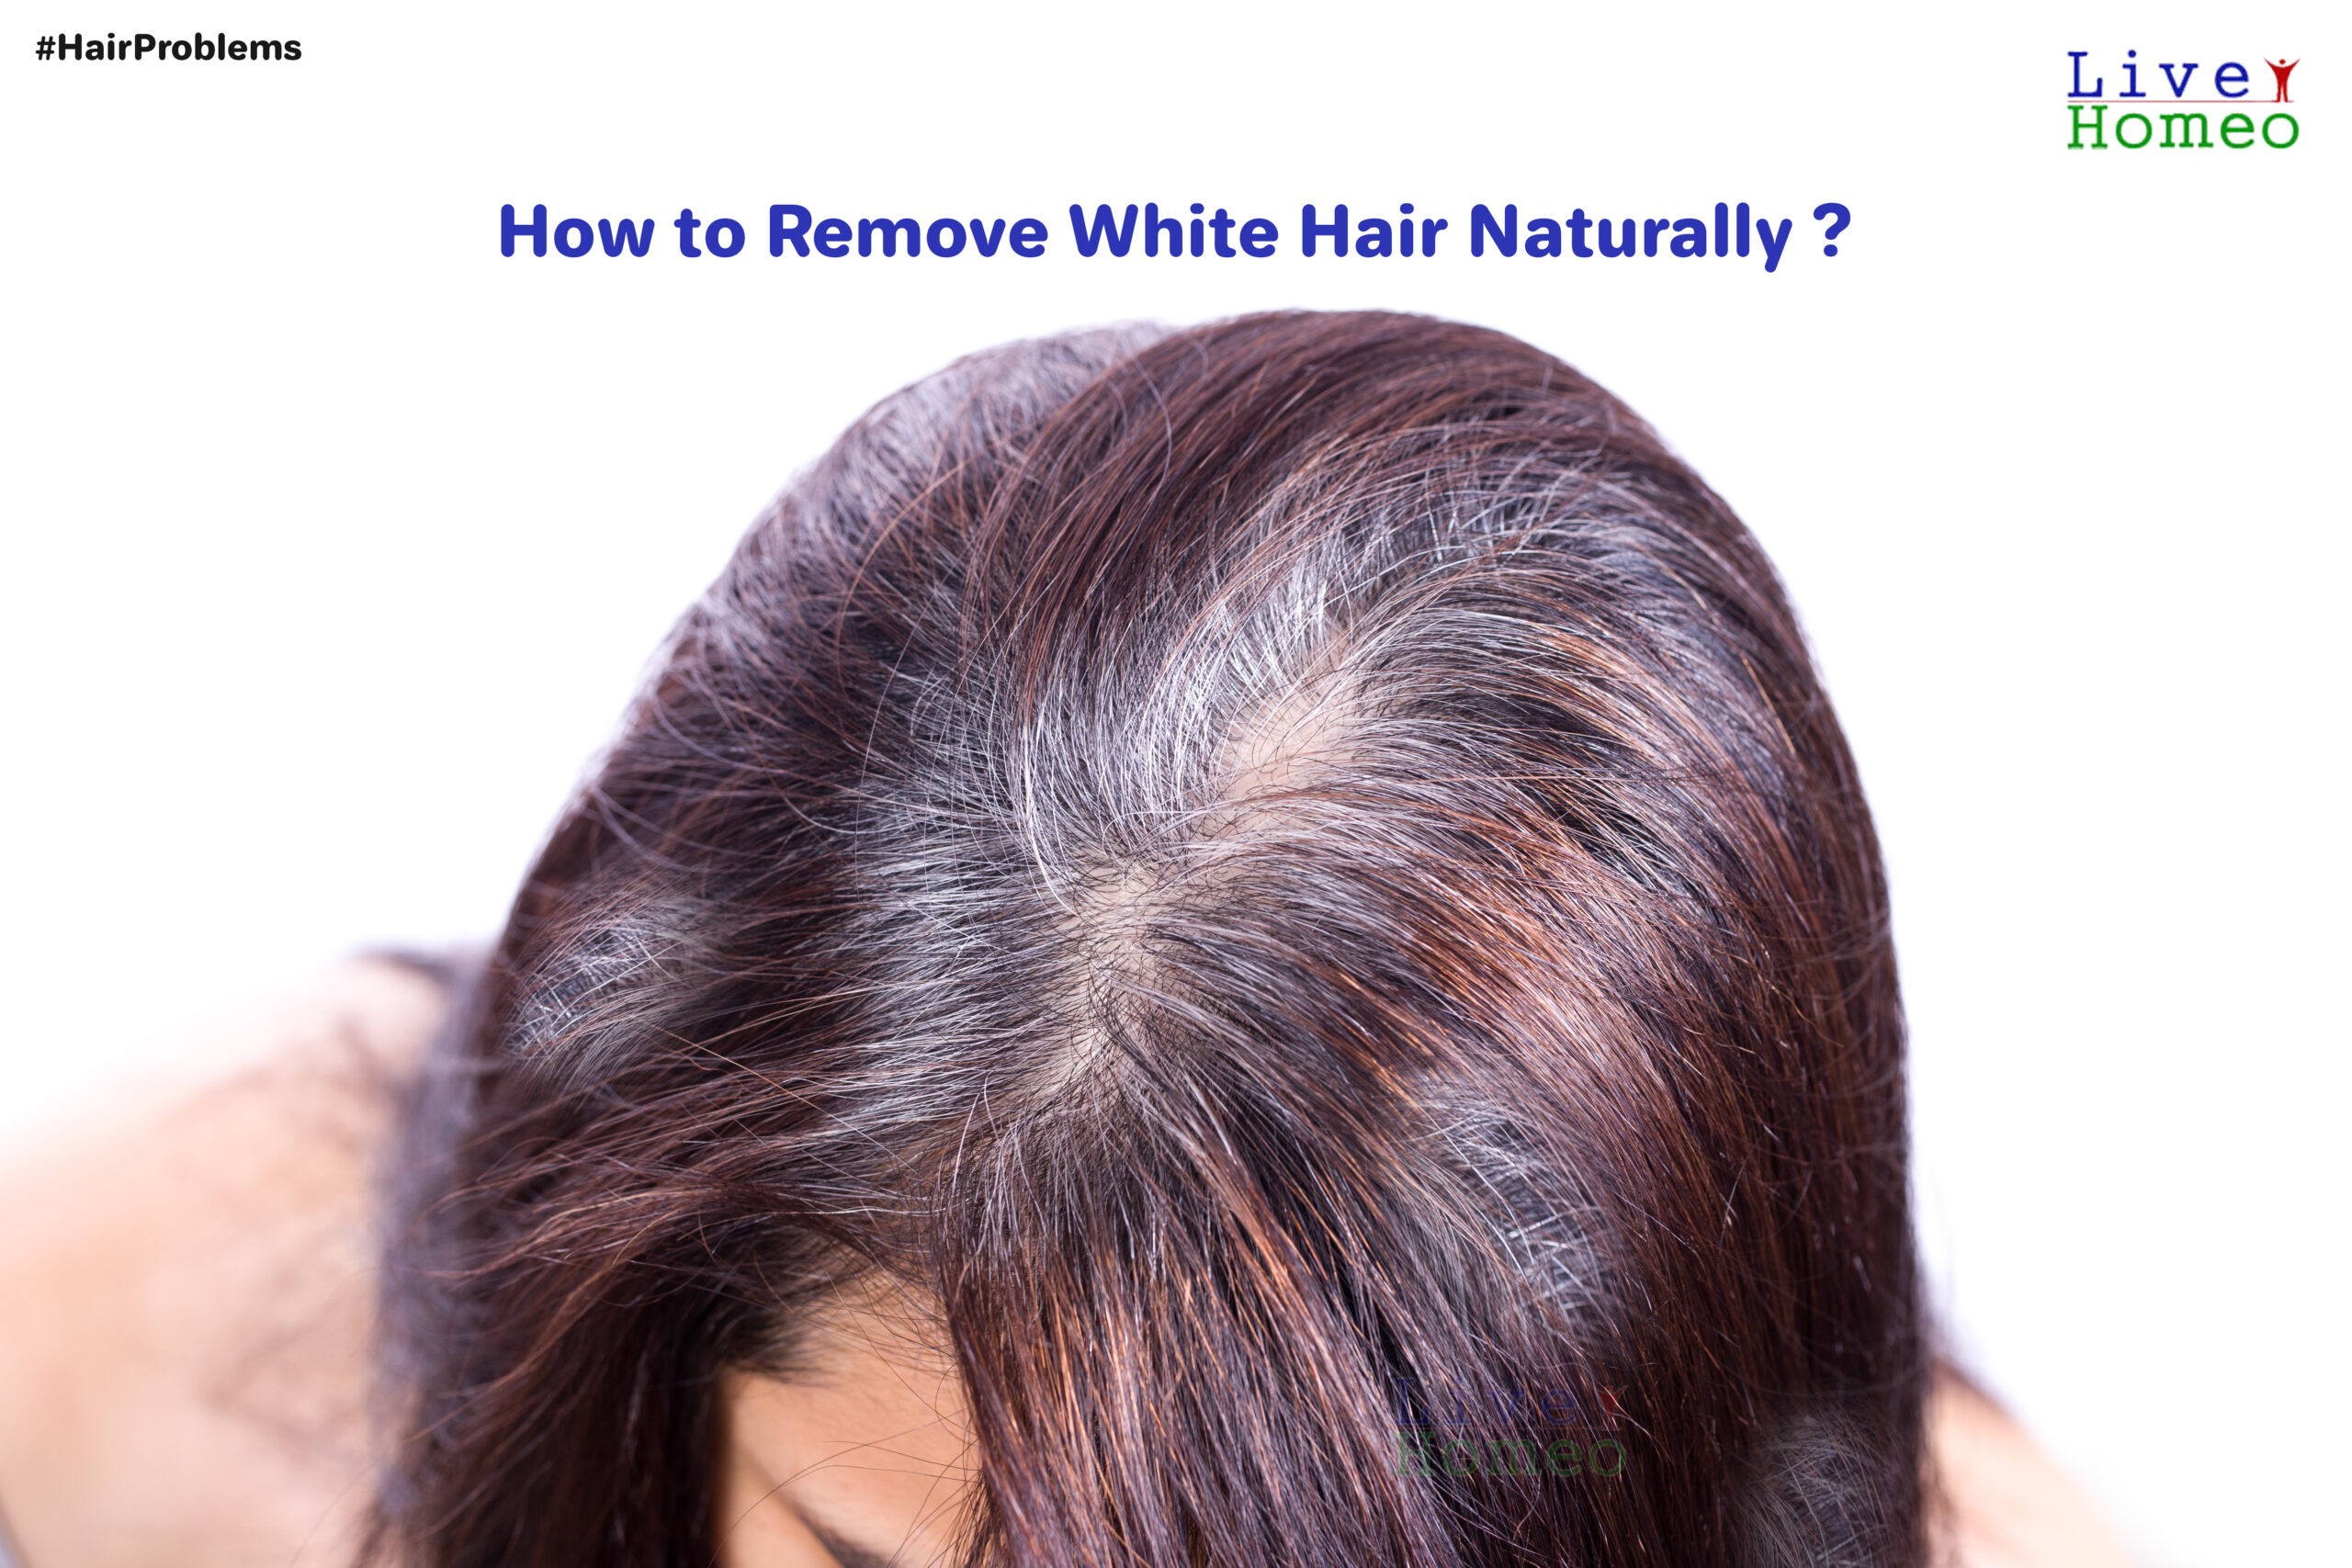 How to Remove White Hair Naturally